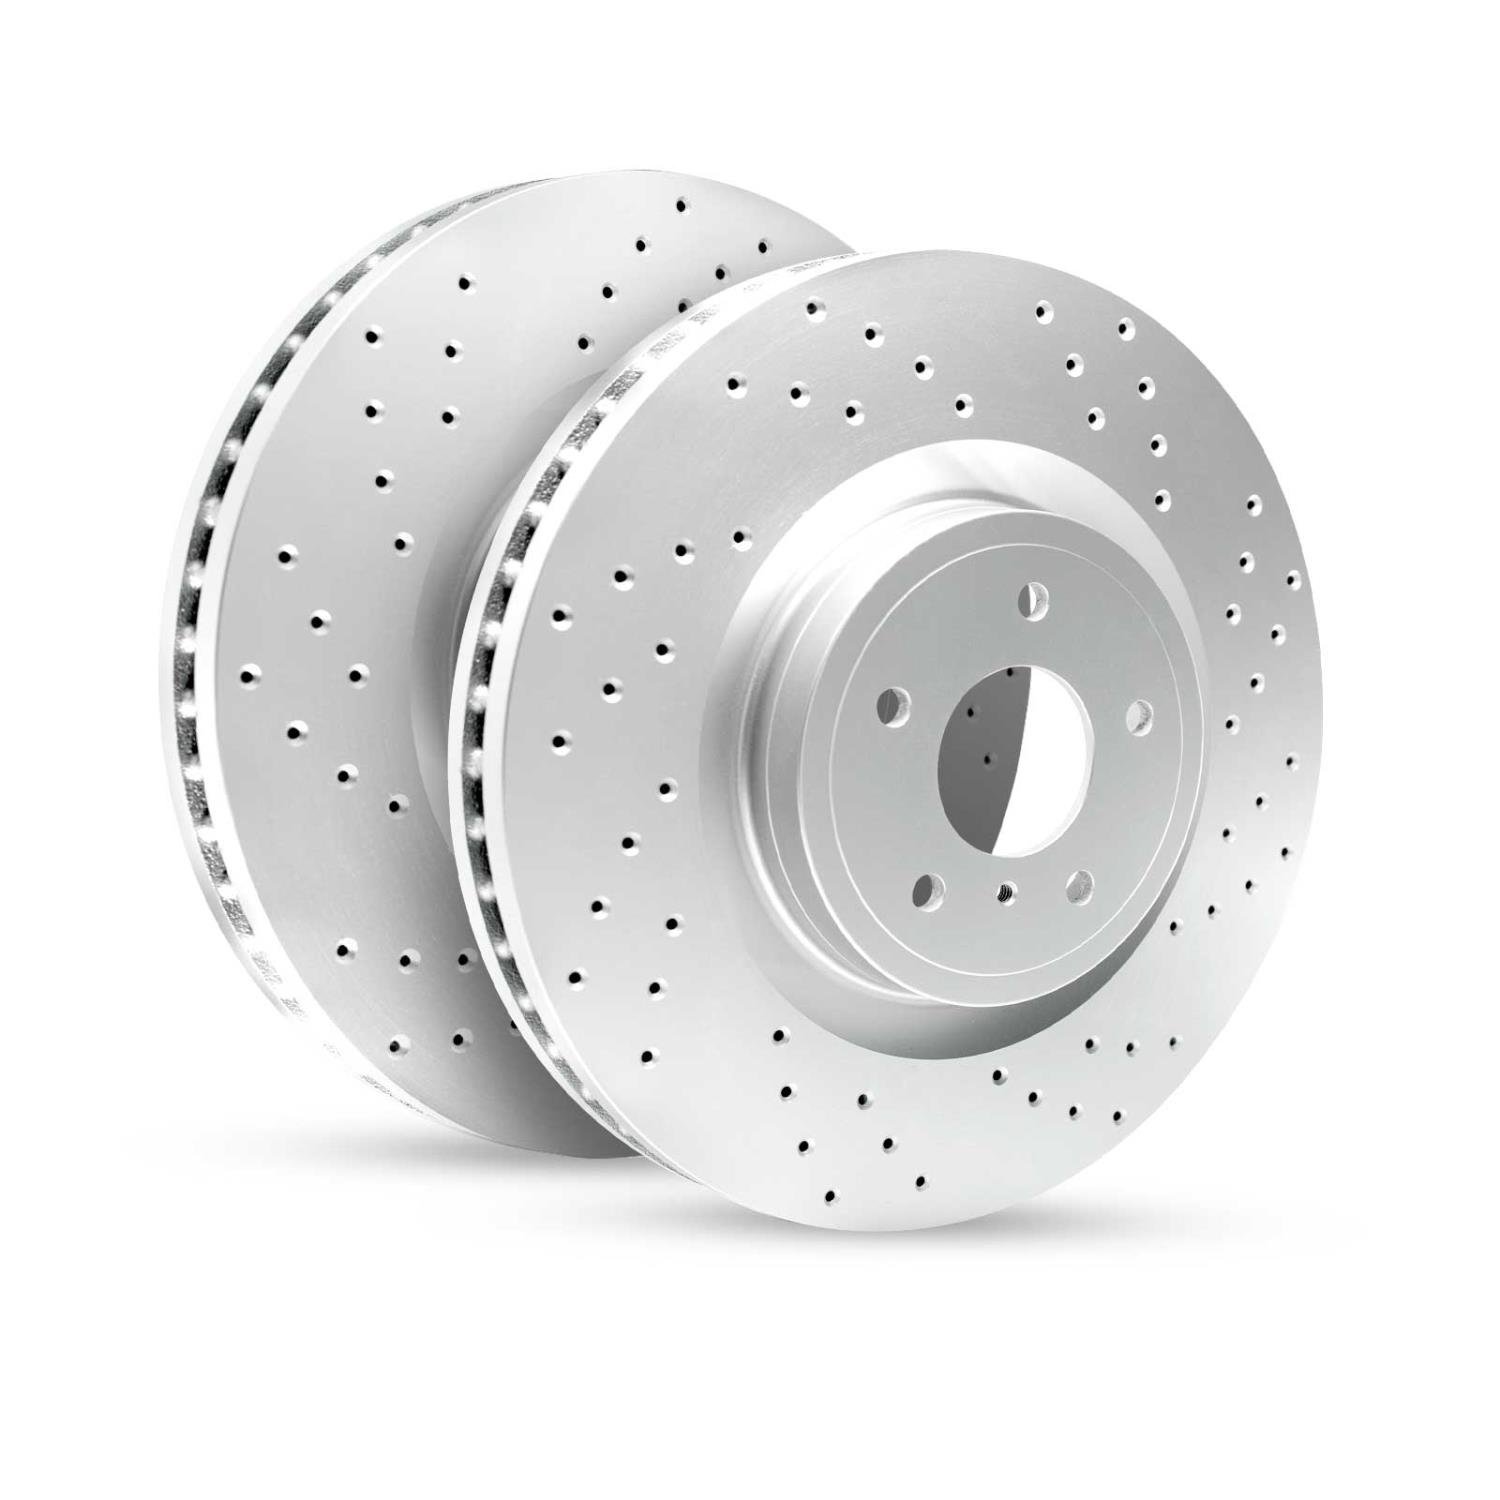 GEO-Carbon Drilled/Slotted Rotors, 1994-2007 Fits Multiple Makes/Models, Position: Rear